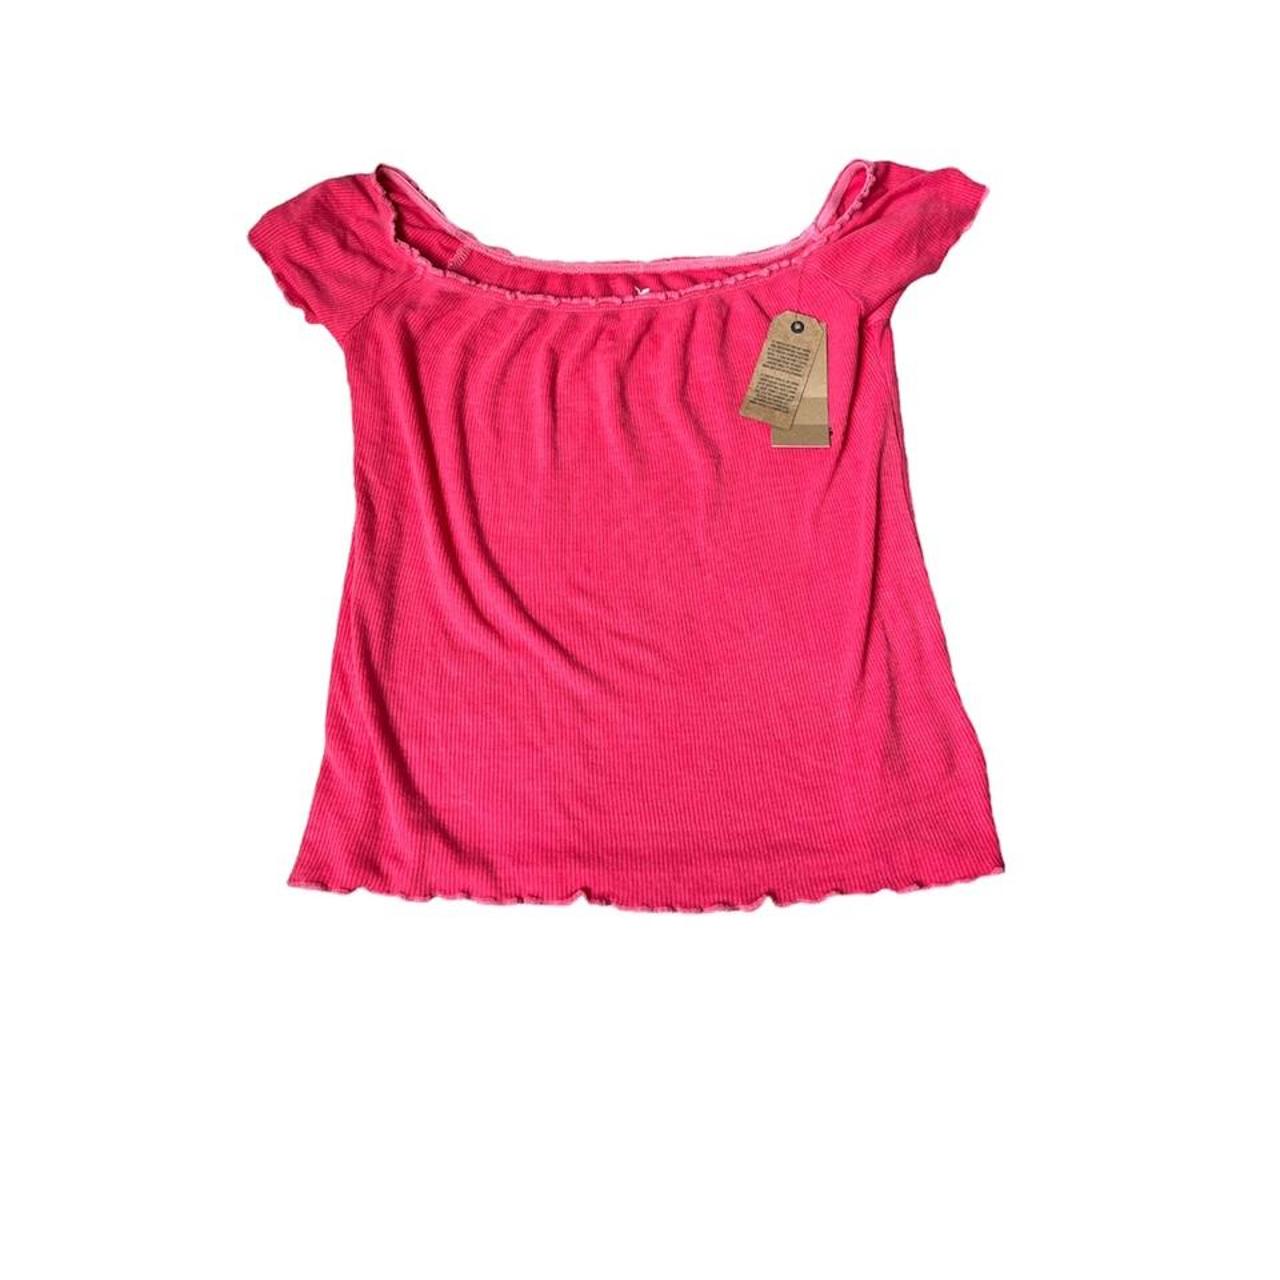 Product Image 1 - American Eagle Outfitters - pink